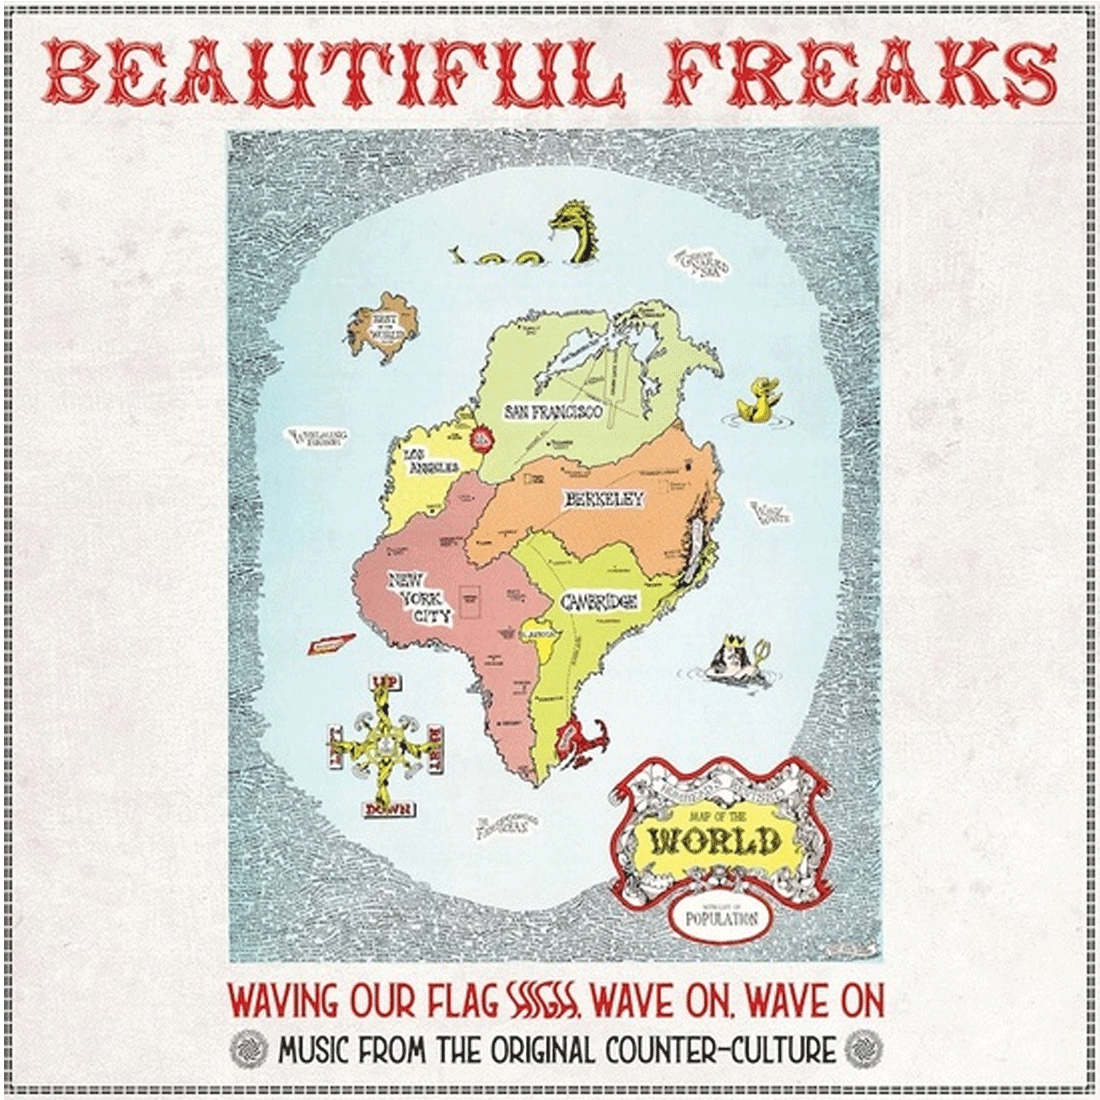 Beautiful Freaks - Waving Our Flag High, Wave On, Wave On (Music From The Original Counter Culture): Vinyl 2LP